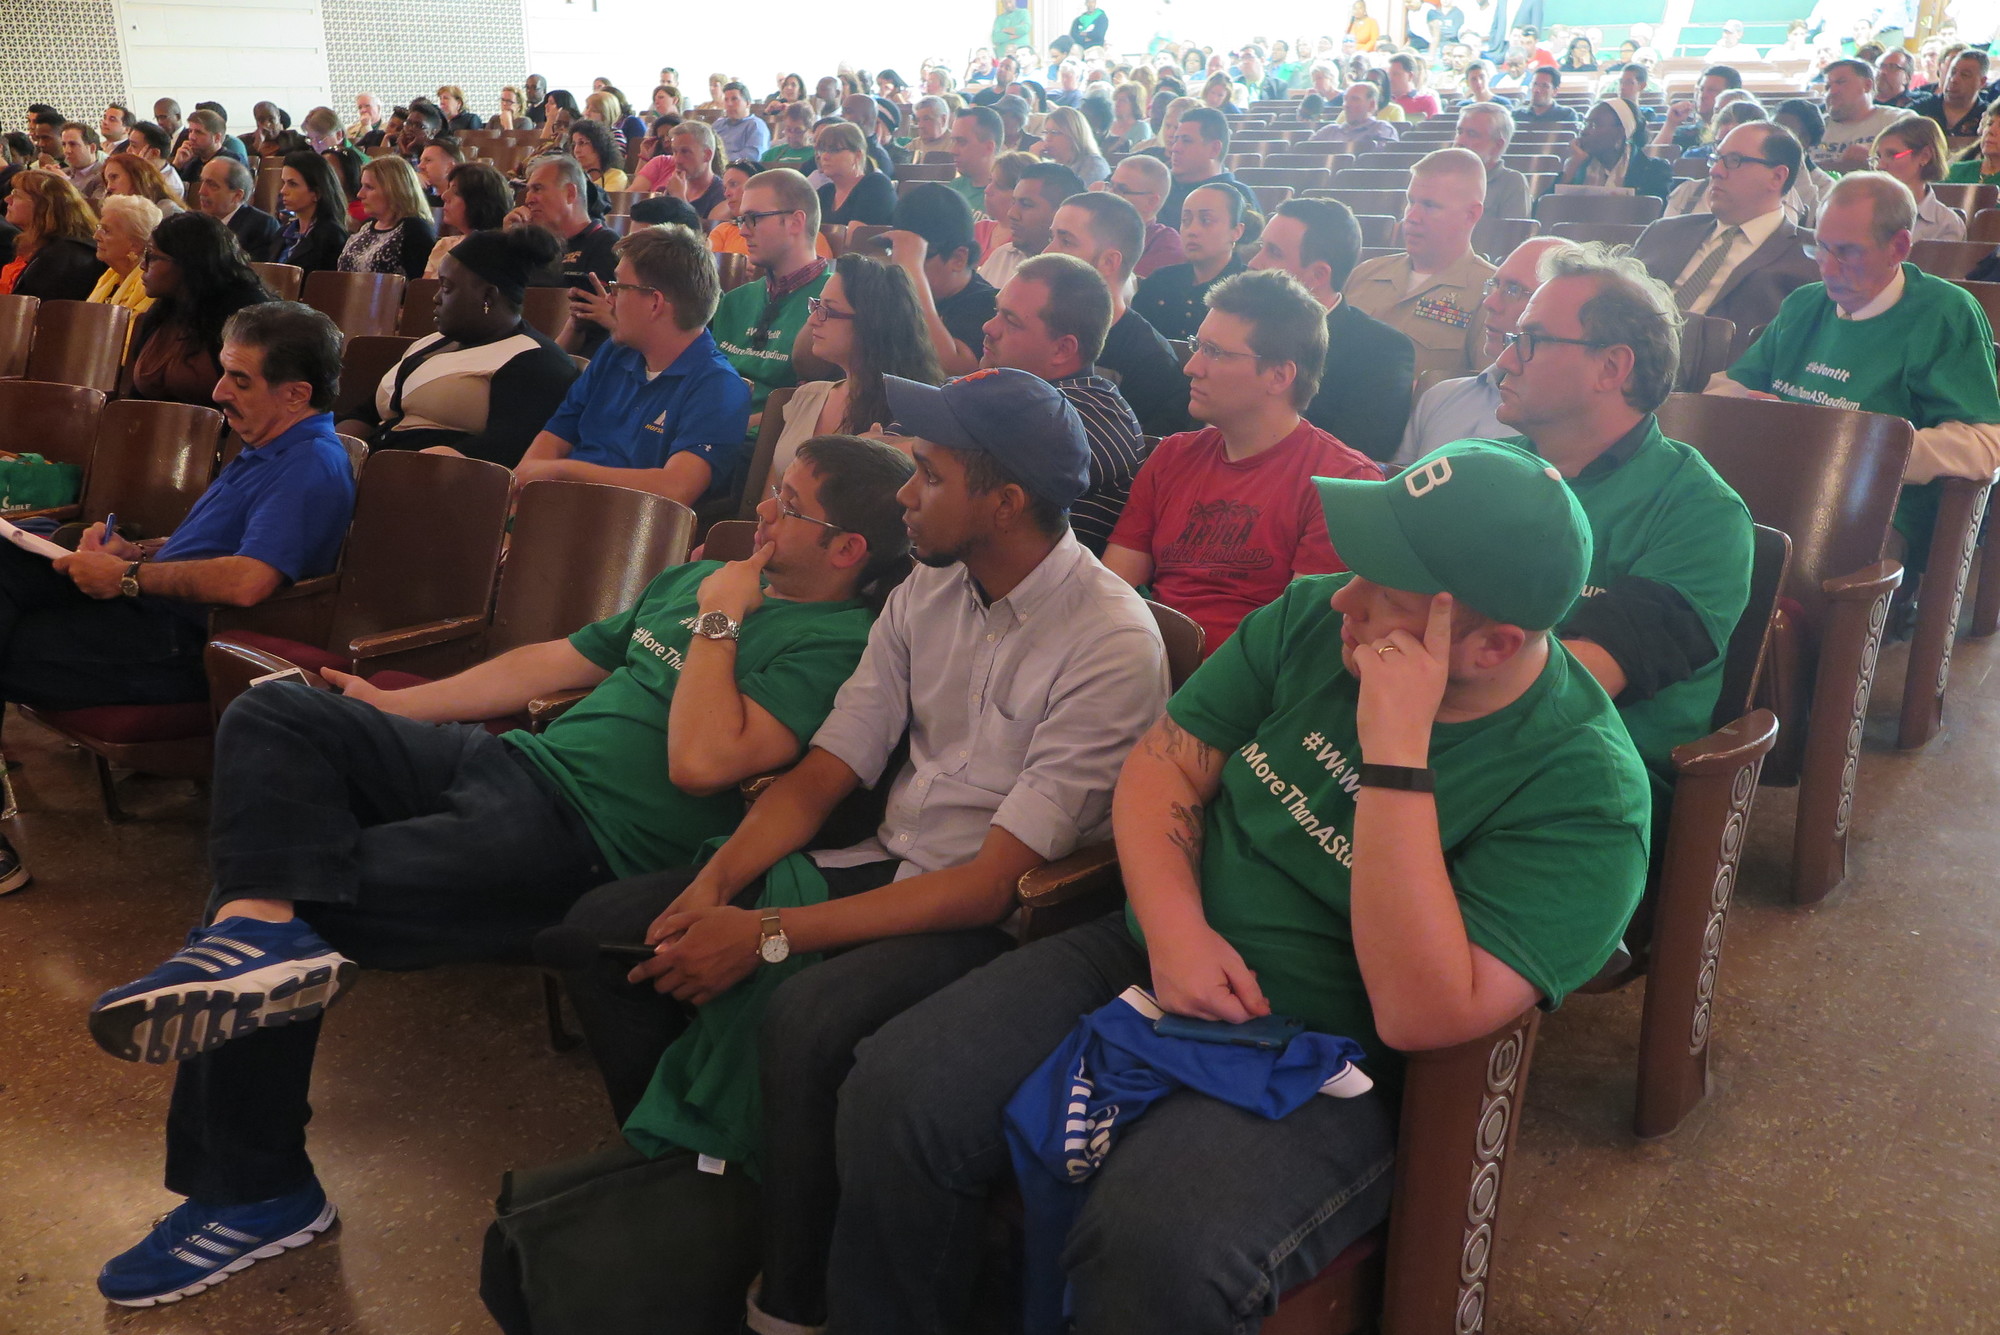 More than 200 residents of Elmont and surrounding communities attended the meeting, some wearing green shirts promoting the Cosmos’ stadium proposal.